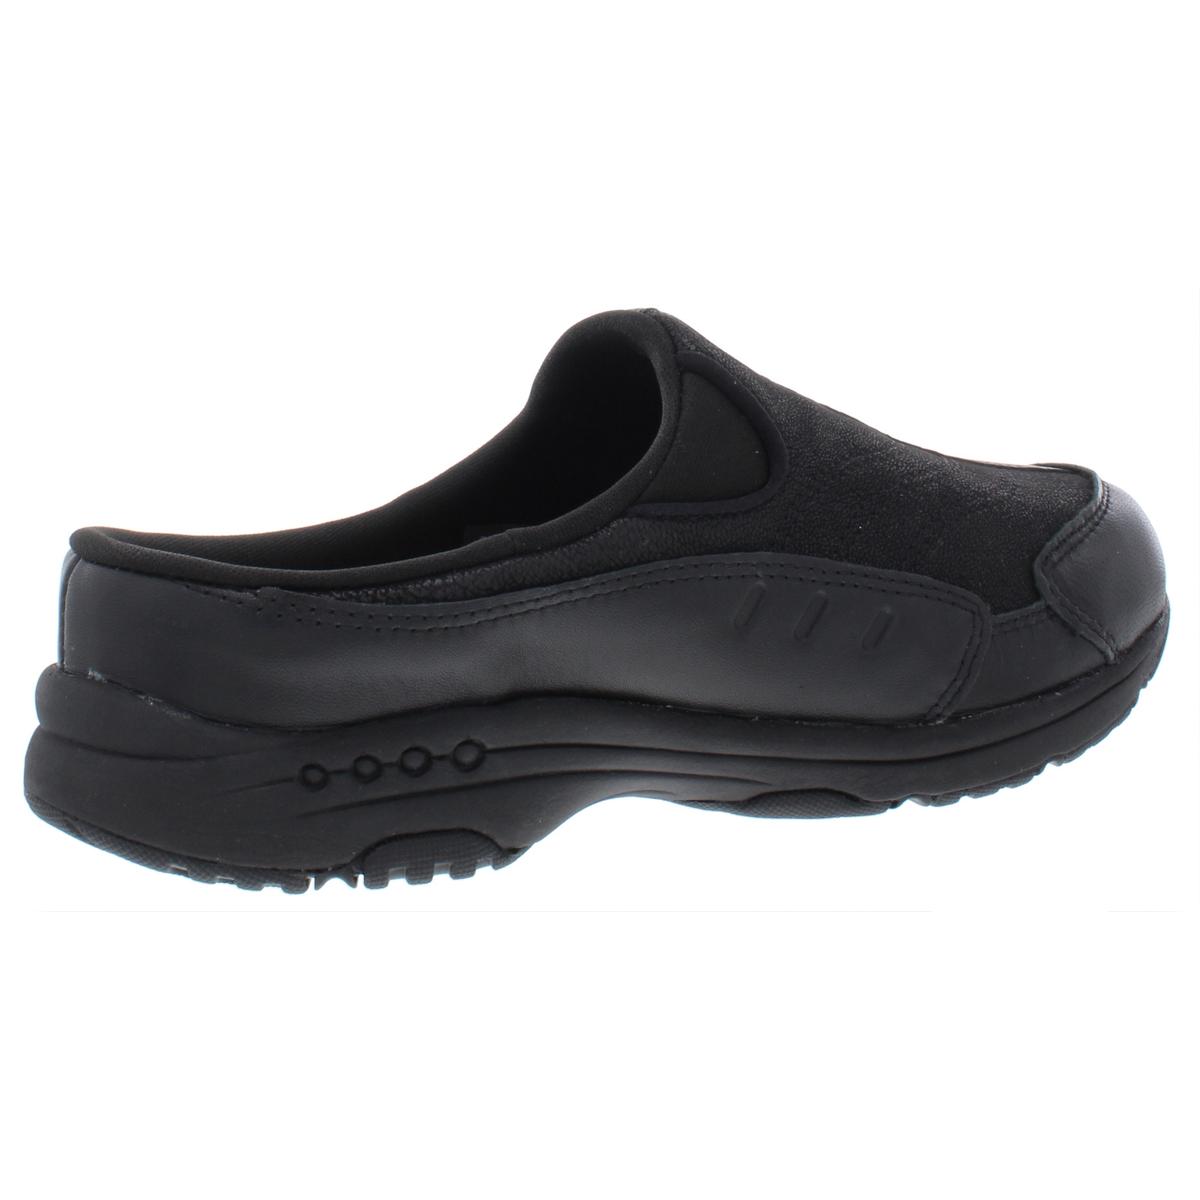 Easy Spirit Womens Travel Time 234 Leather Comfort Insole Clogs Shoes BHFO 3127 WT10995